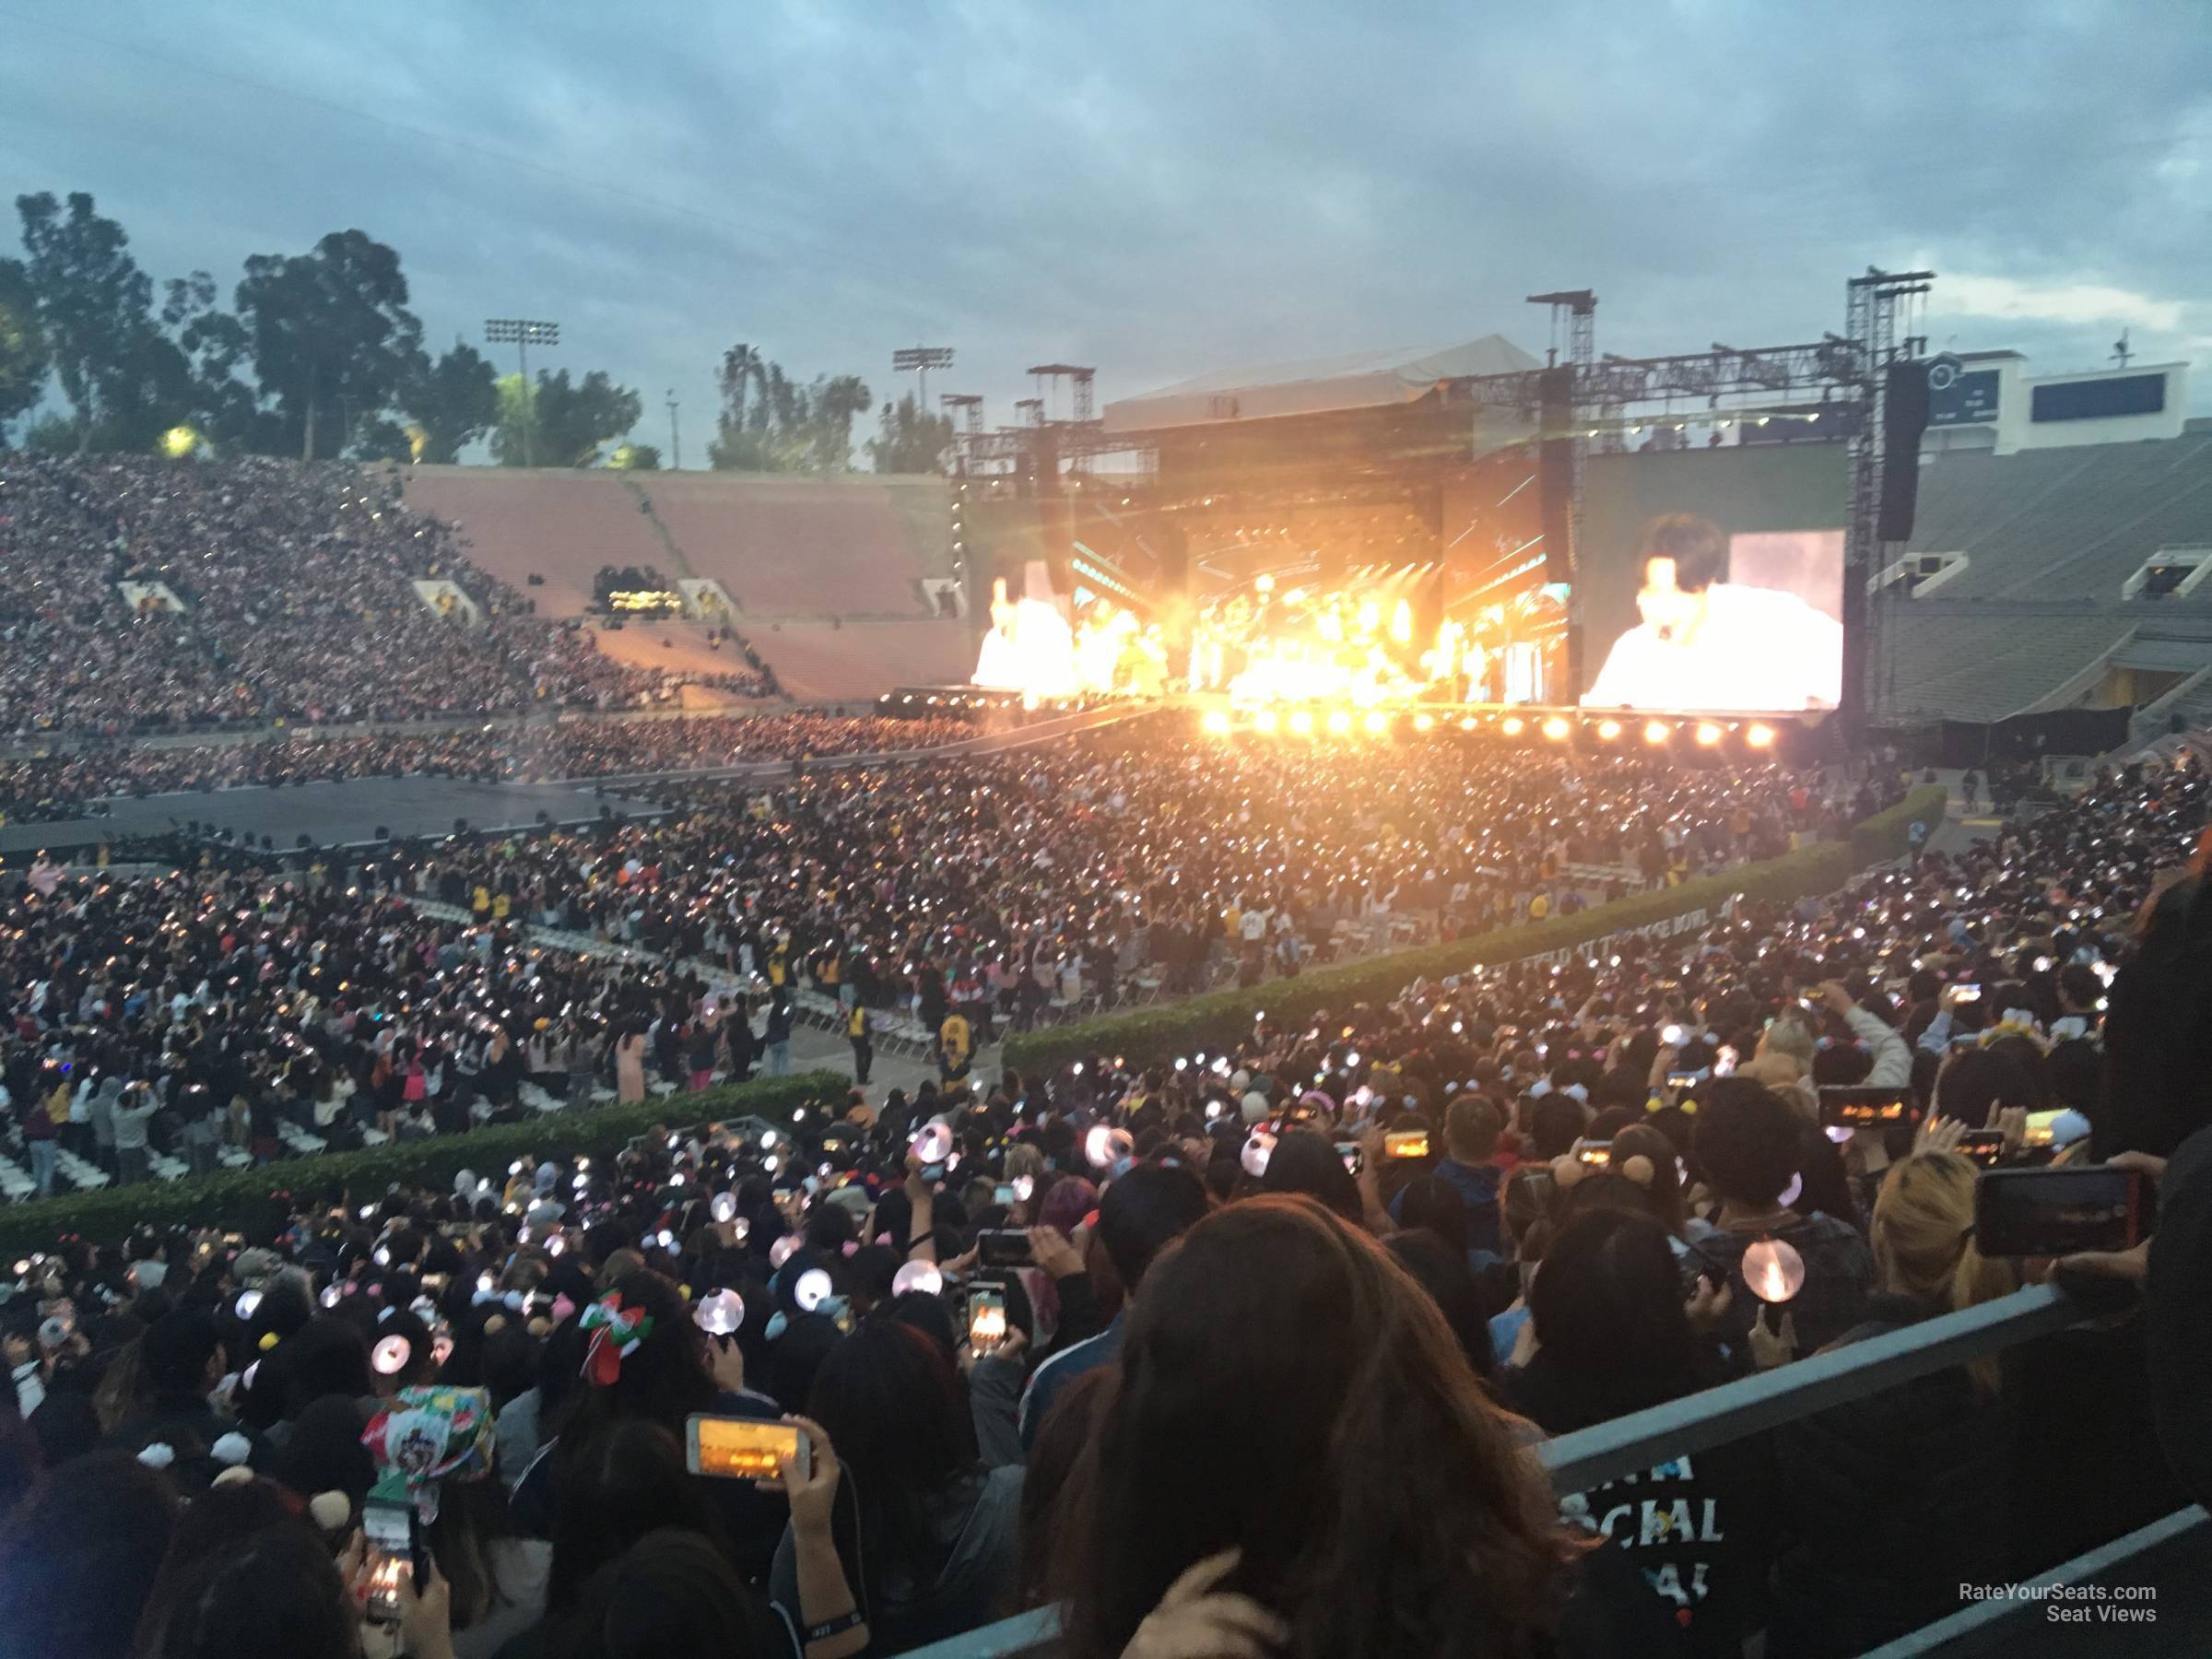 section 17, row 30 seat view  for concert - rose bowl stadium